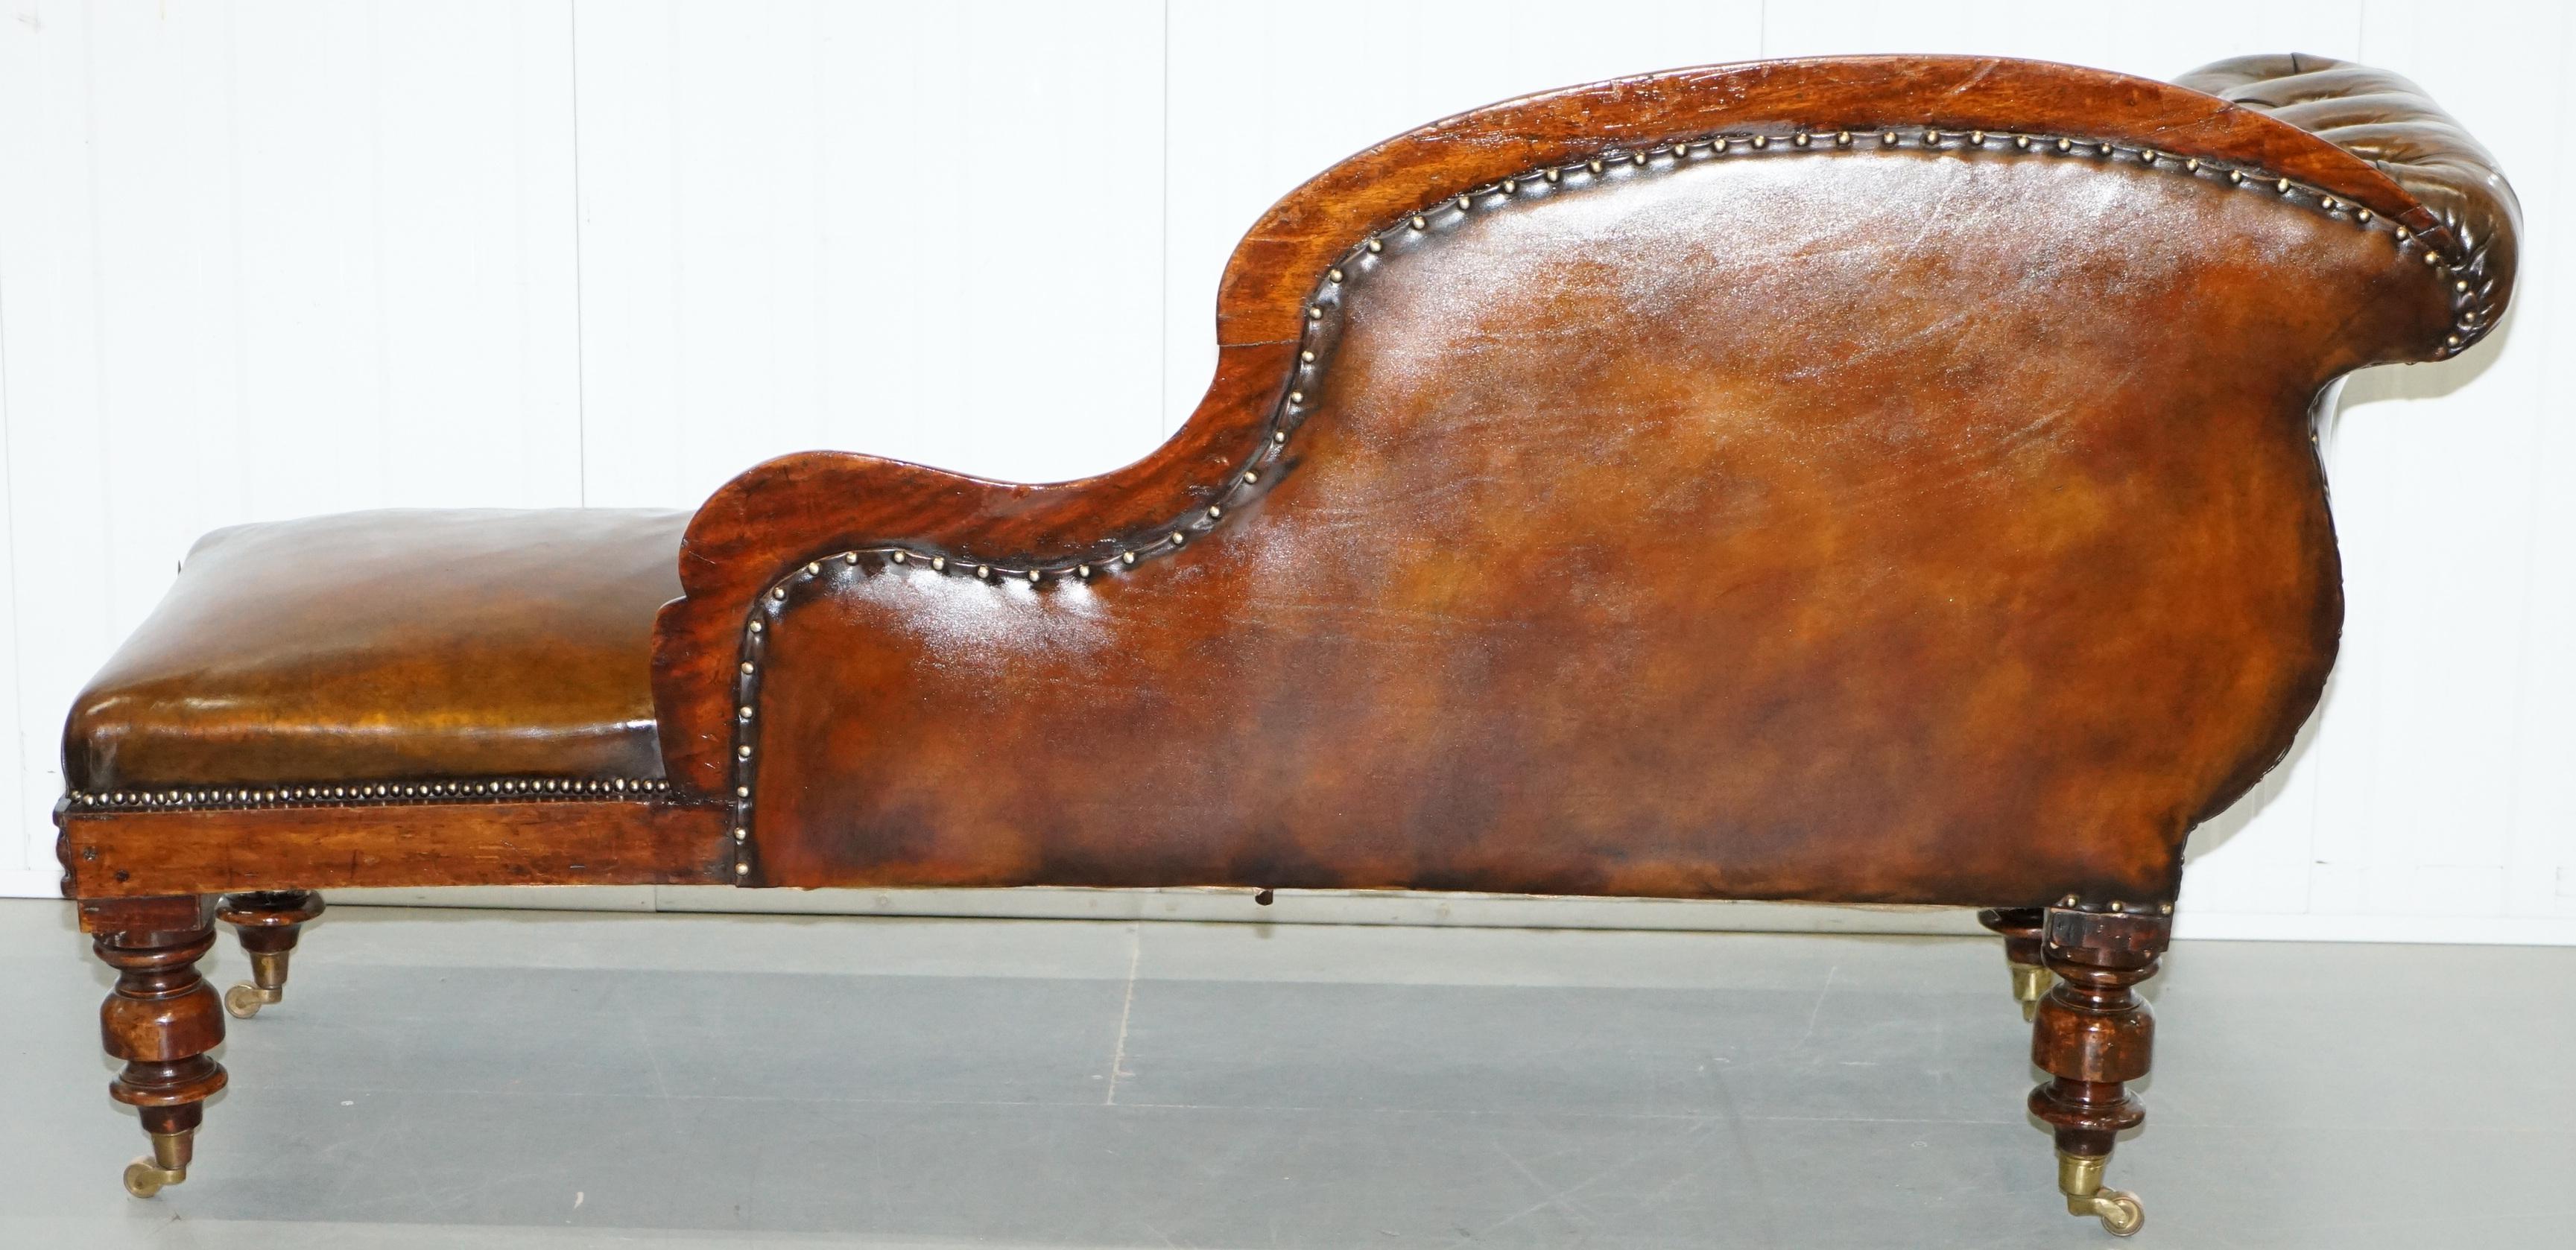 Stunning Restored Victorian Chesterfield Aged Brown Leather Chaise Longue Daybed 8